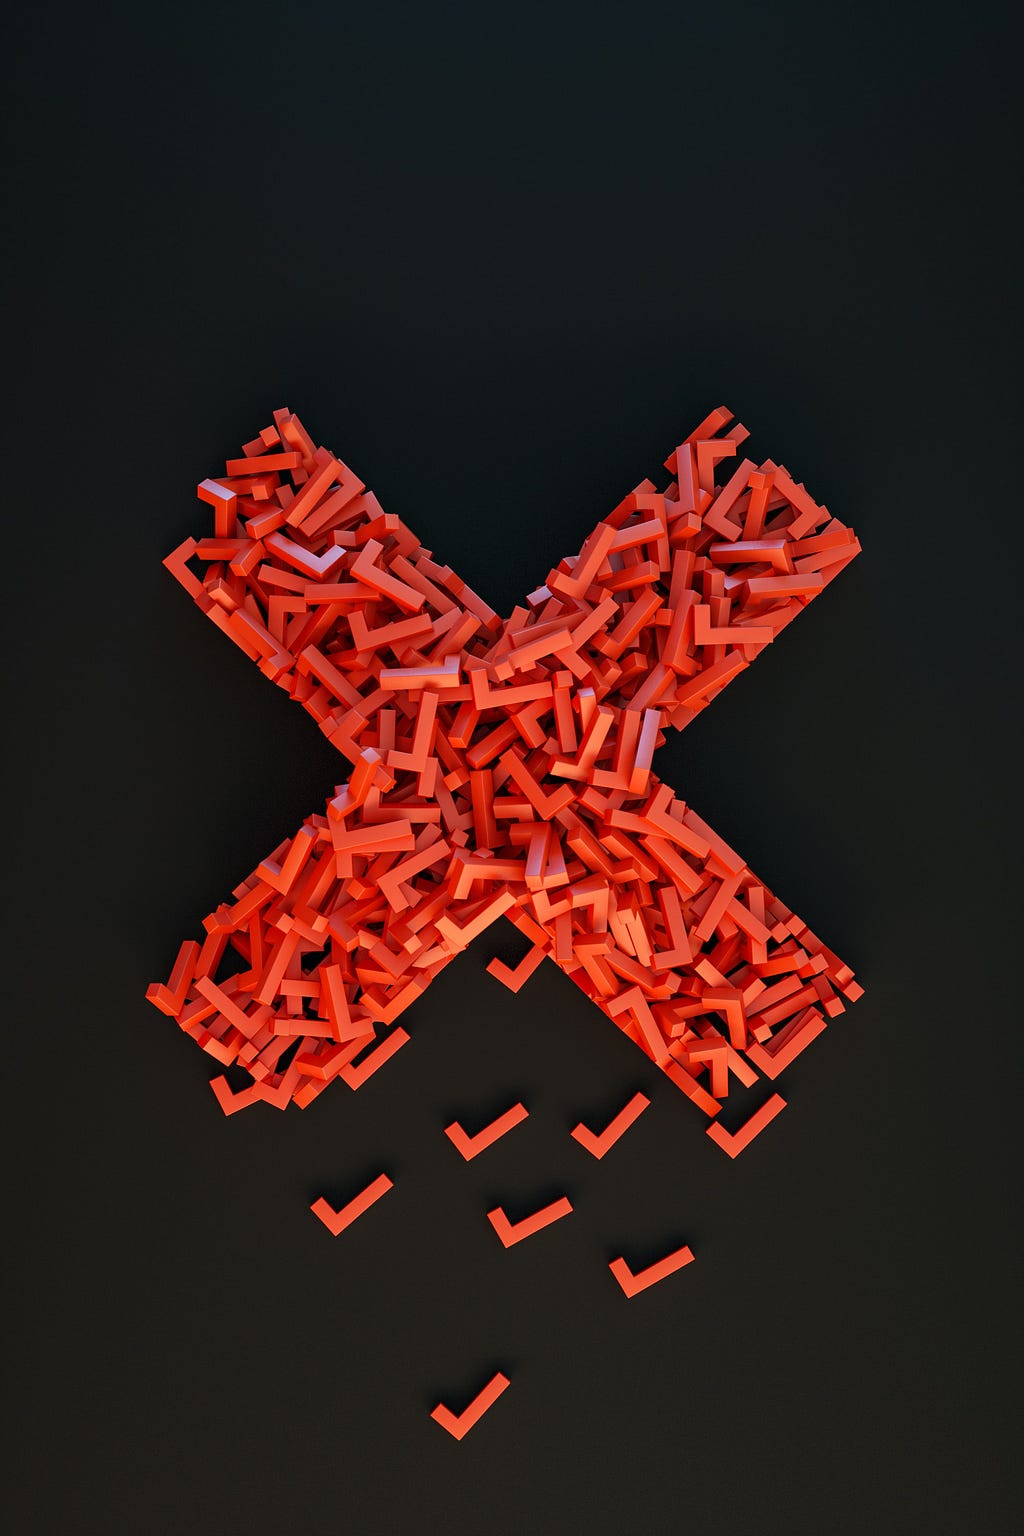 A pile of red check marks arranged into an X shape on a black background.